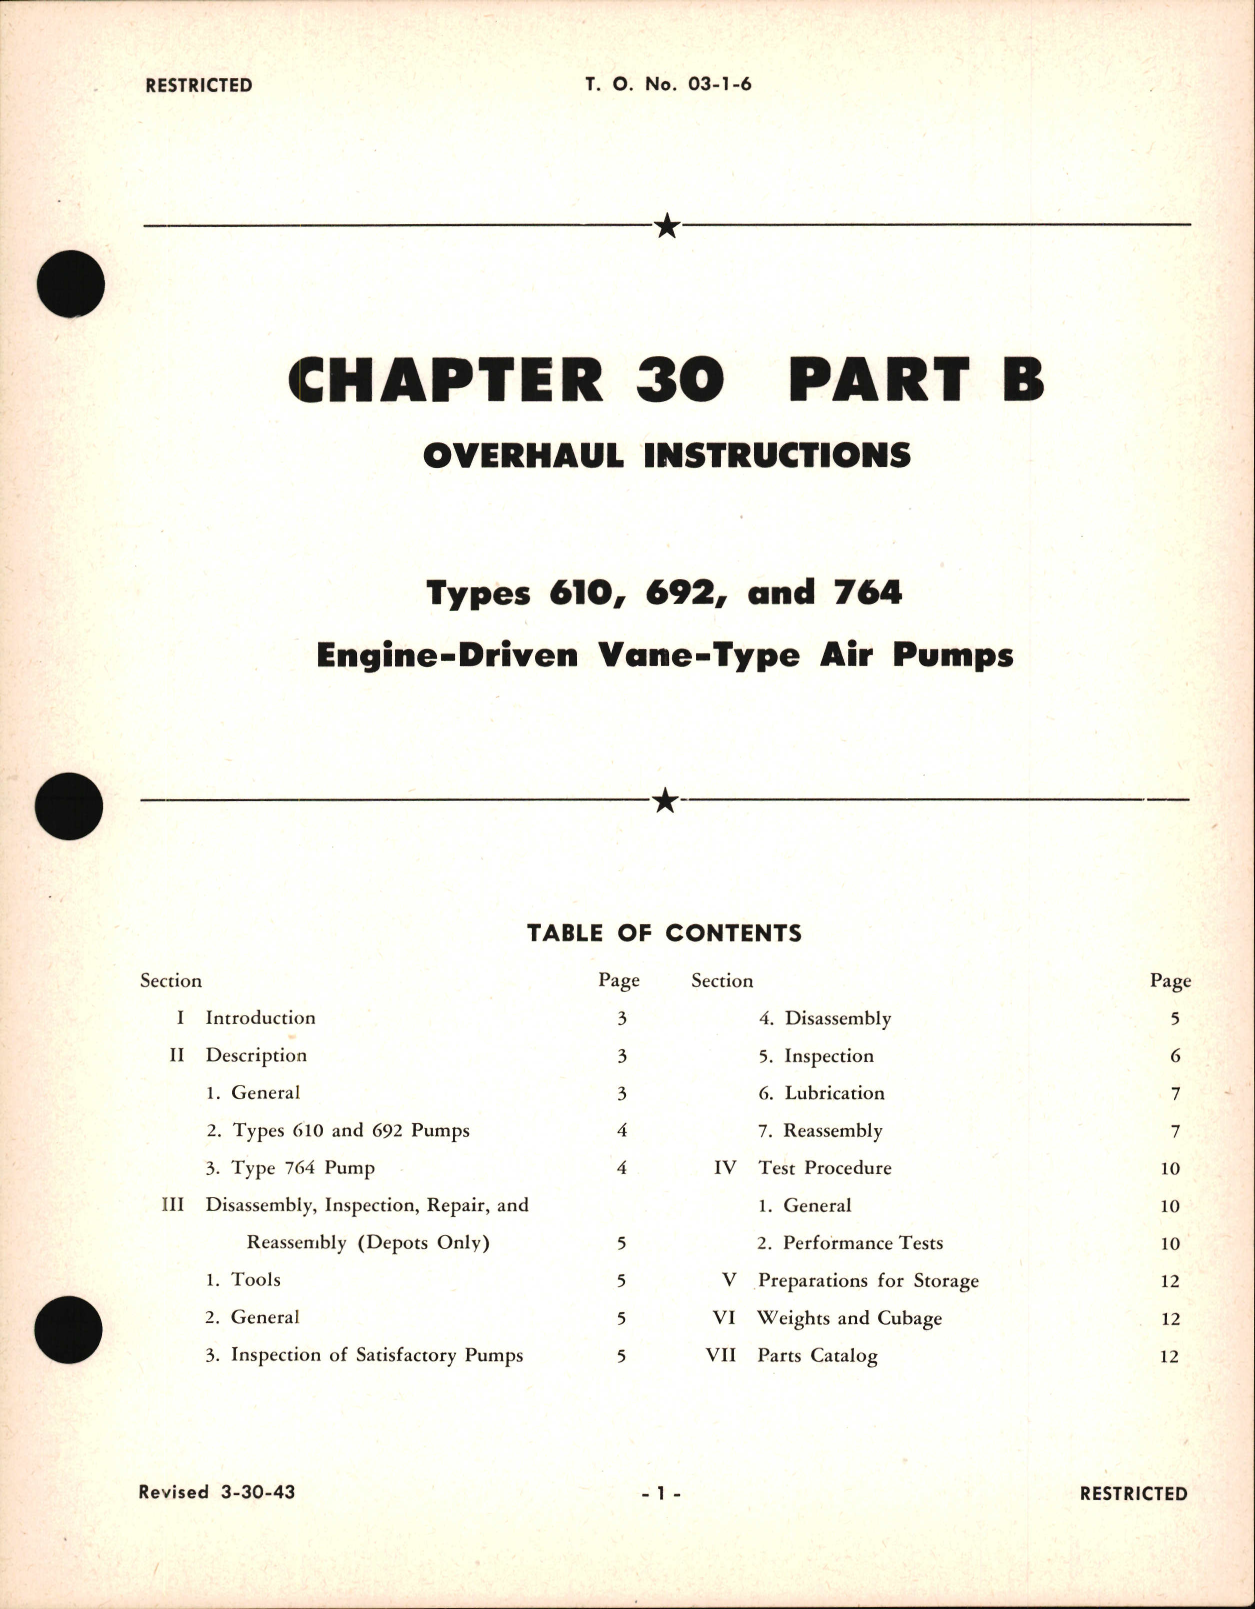 Sample page 1 from AirCorps Library document: Overhaul Instructions for Engine Driven Vane Type Air Pumps, Chapter 30 Part B